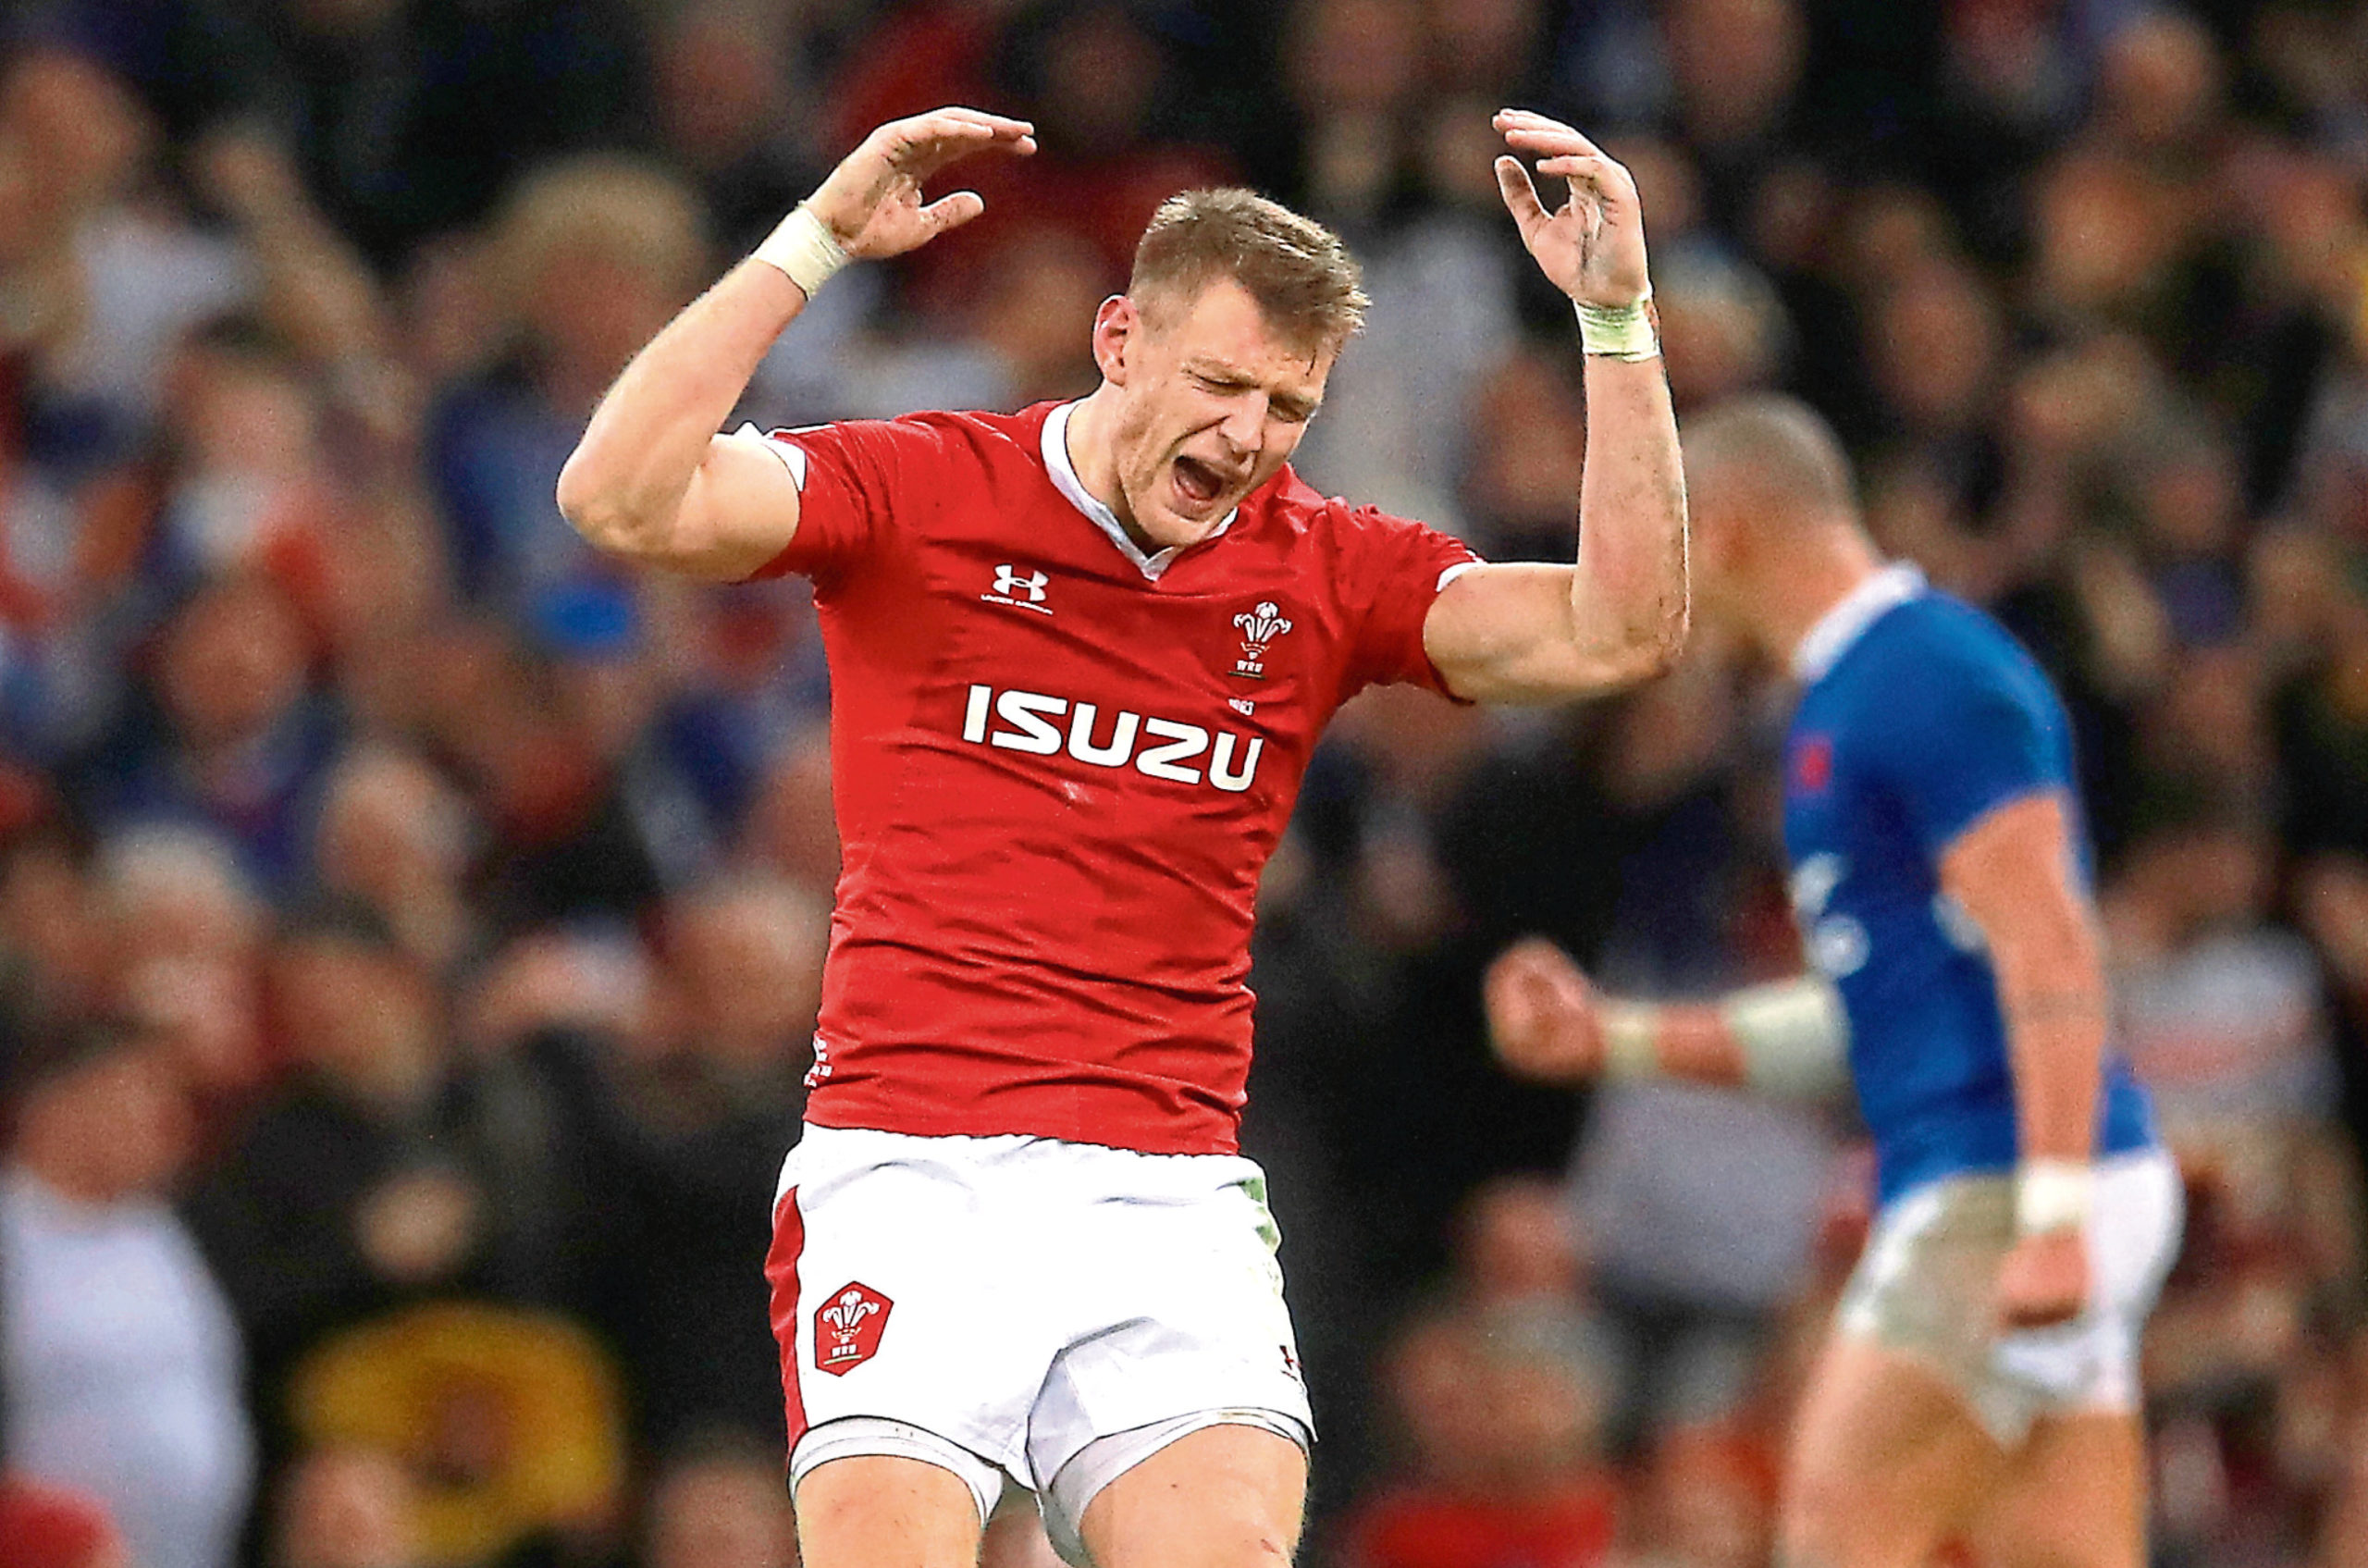 Wales' Dan Biggar played the game against France seemingly in the midst of a 80-minute tantrum.